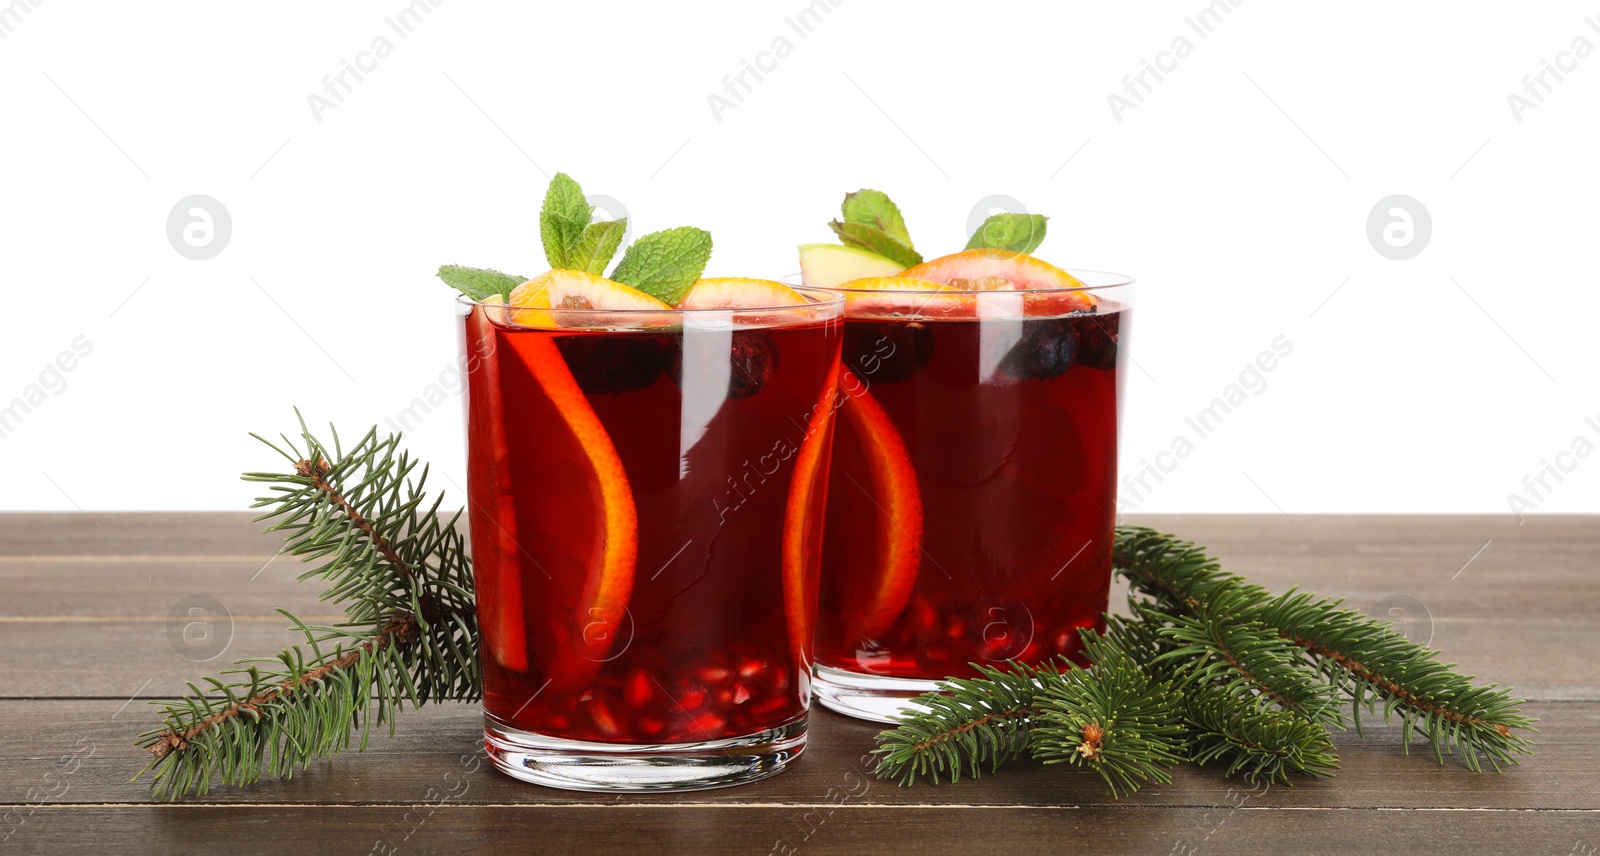 Photo of Aromatic Christmas Sangria drink in glasses and fir branches on wooden table against white background